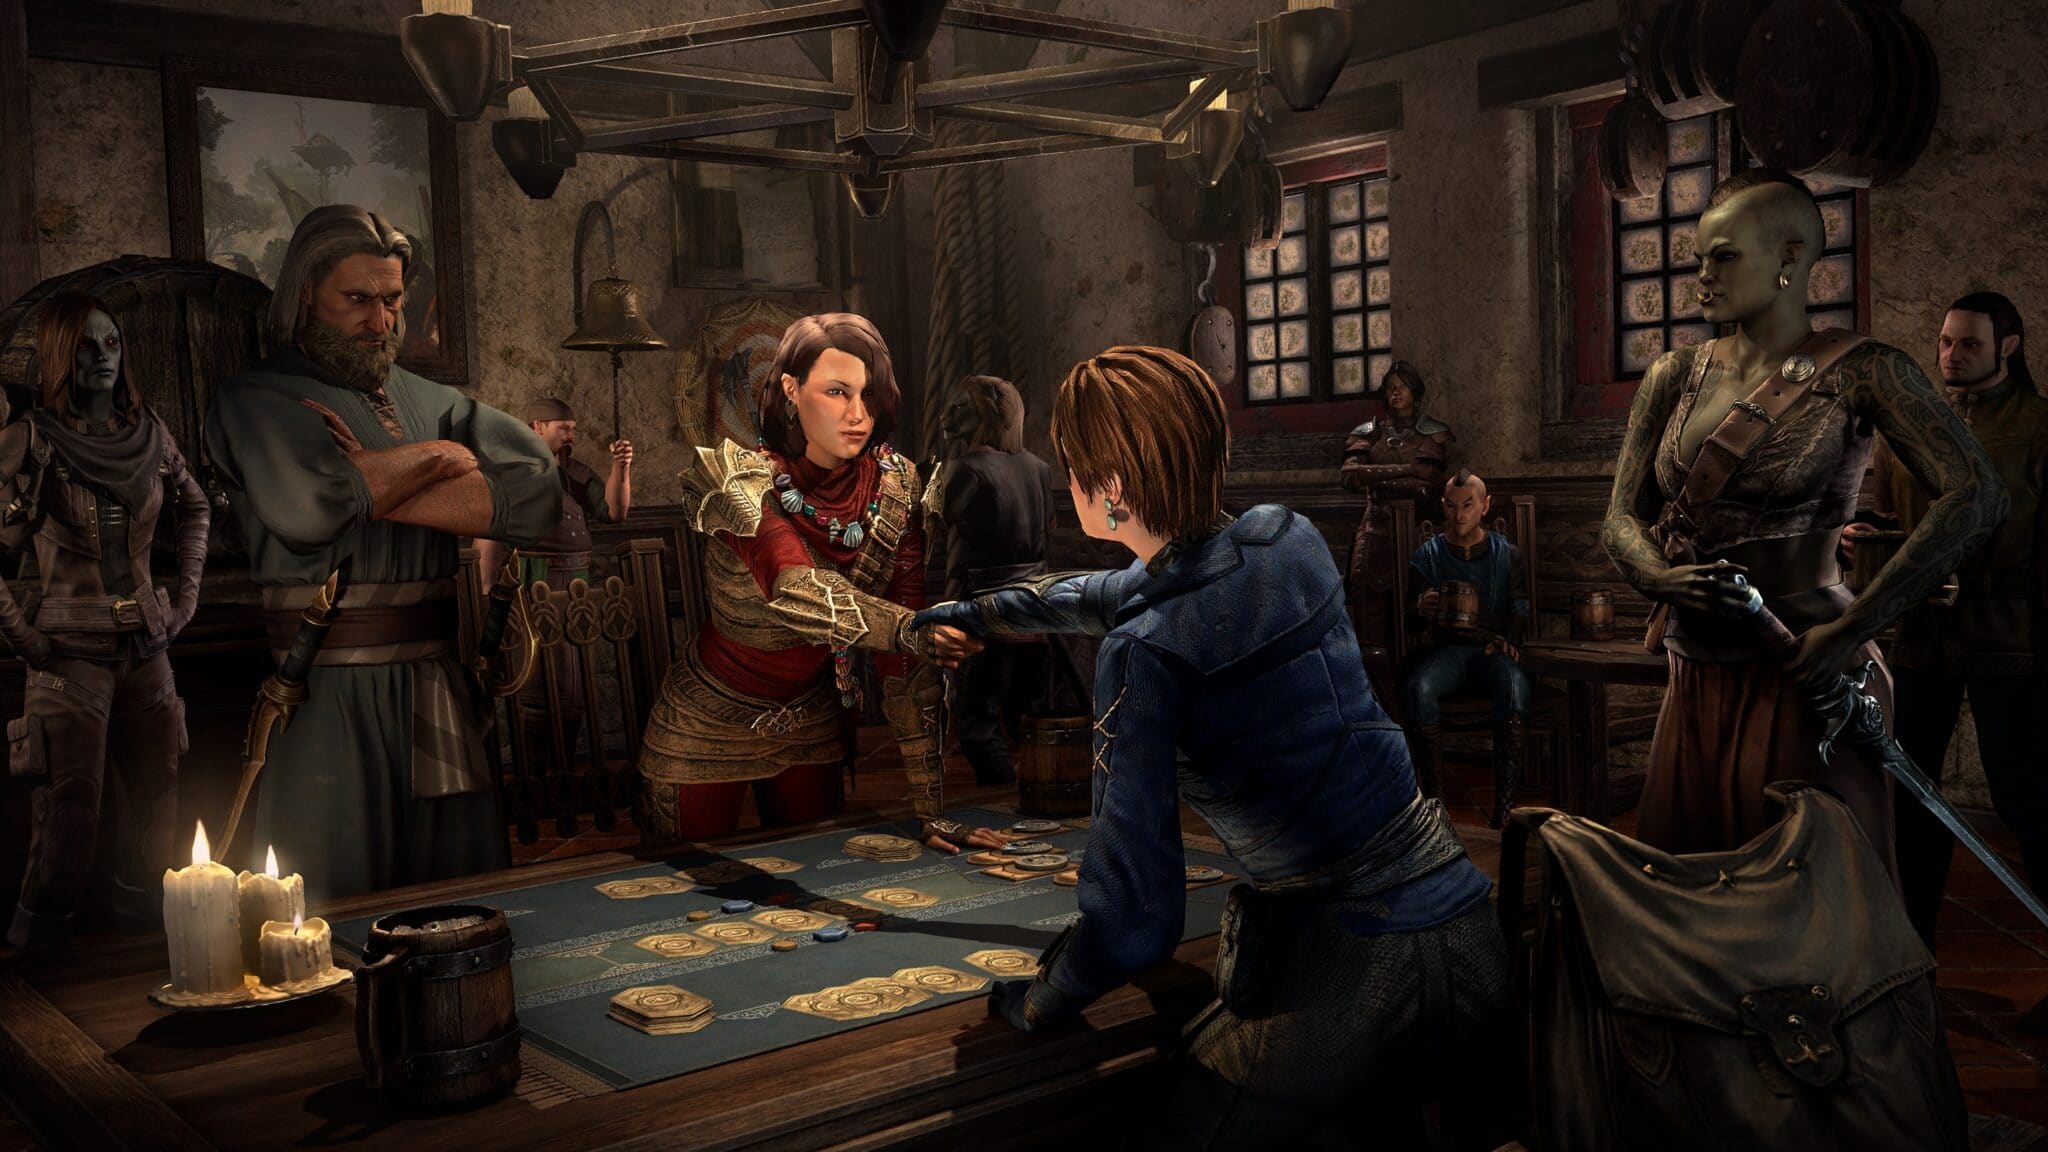 The people of Tamriel like to amuse themselves by playing glory story cards in the tavern.